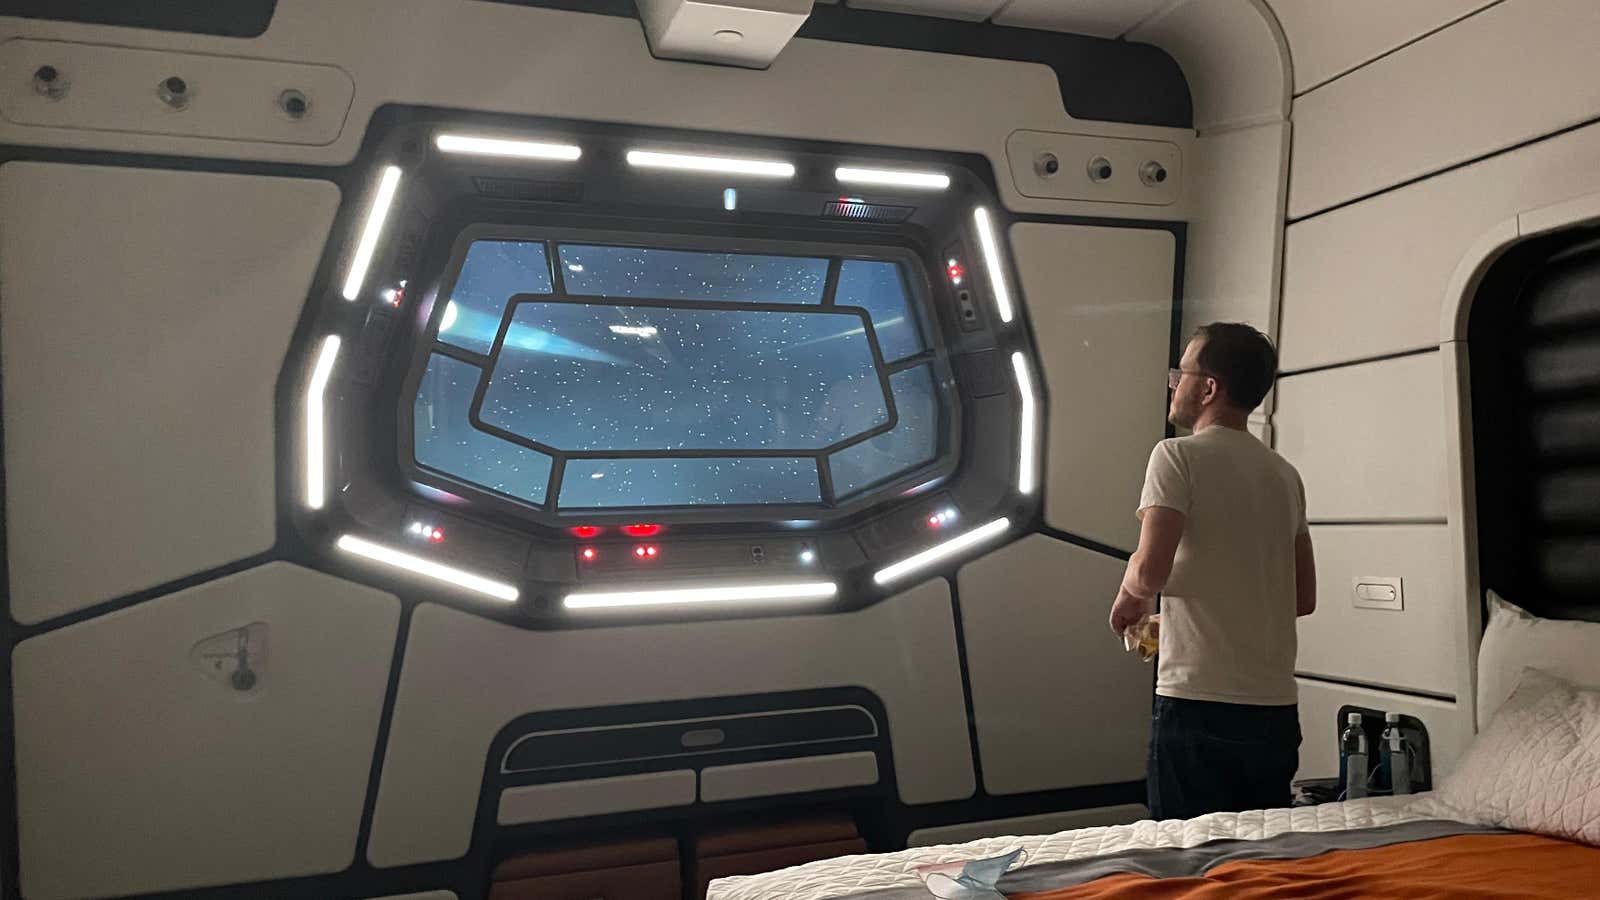 Disney's $6,000 <i>Star Wars</i> Hotel Is Incredibly Immersive—But It Still Costs $6,000